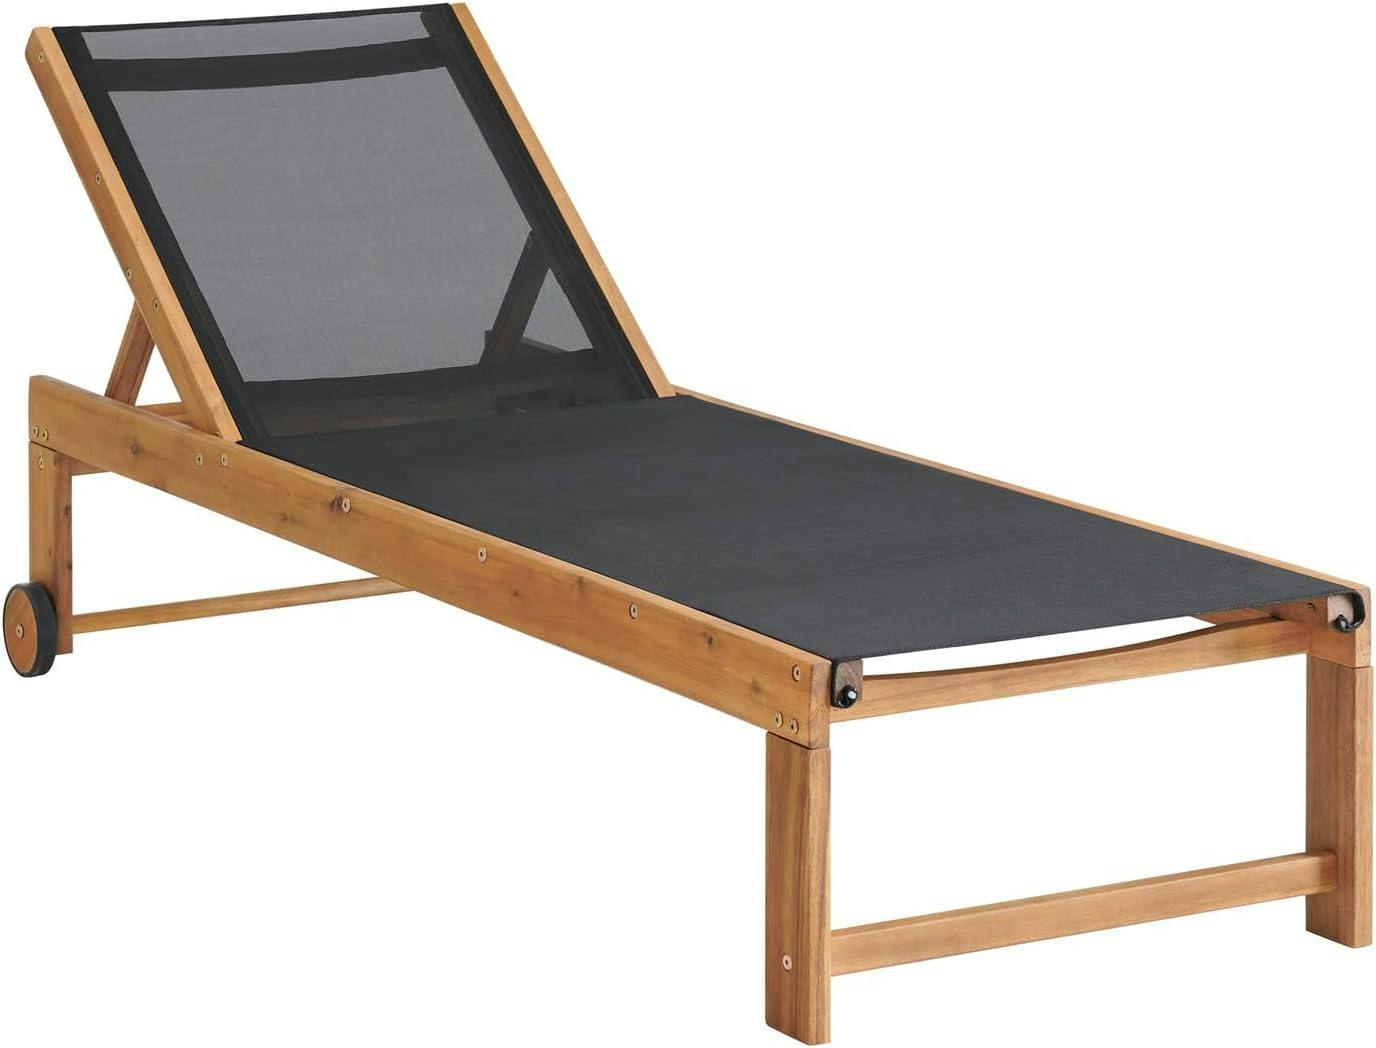 Sunapee Adjustable Acacia Wood Outdoor Chaise Lounger with Mesh Seating